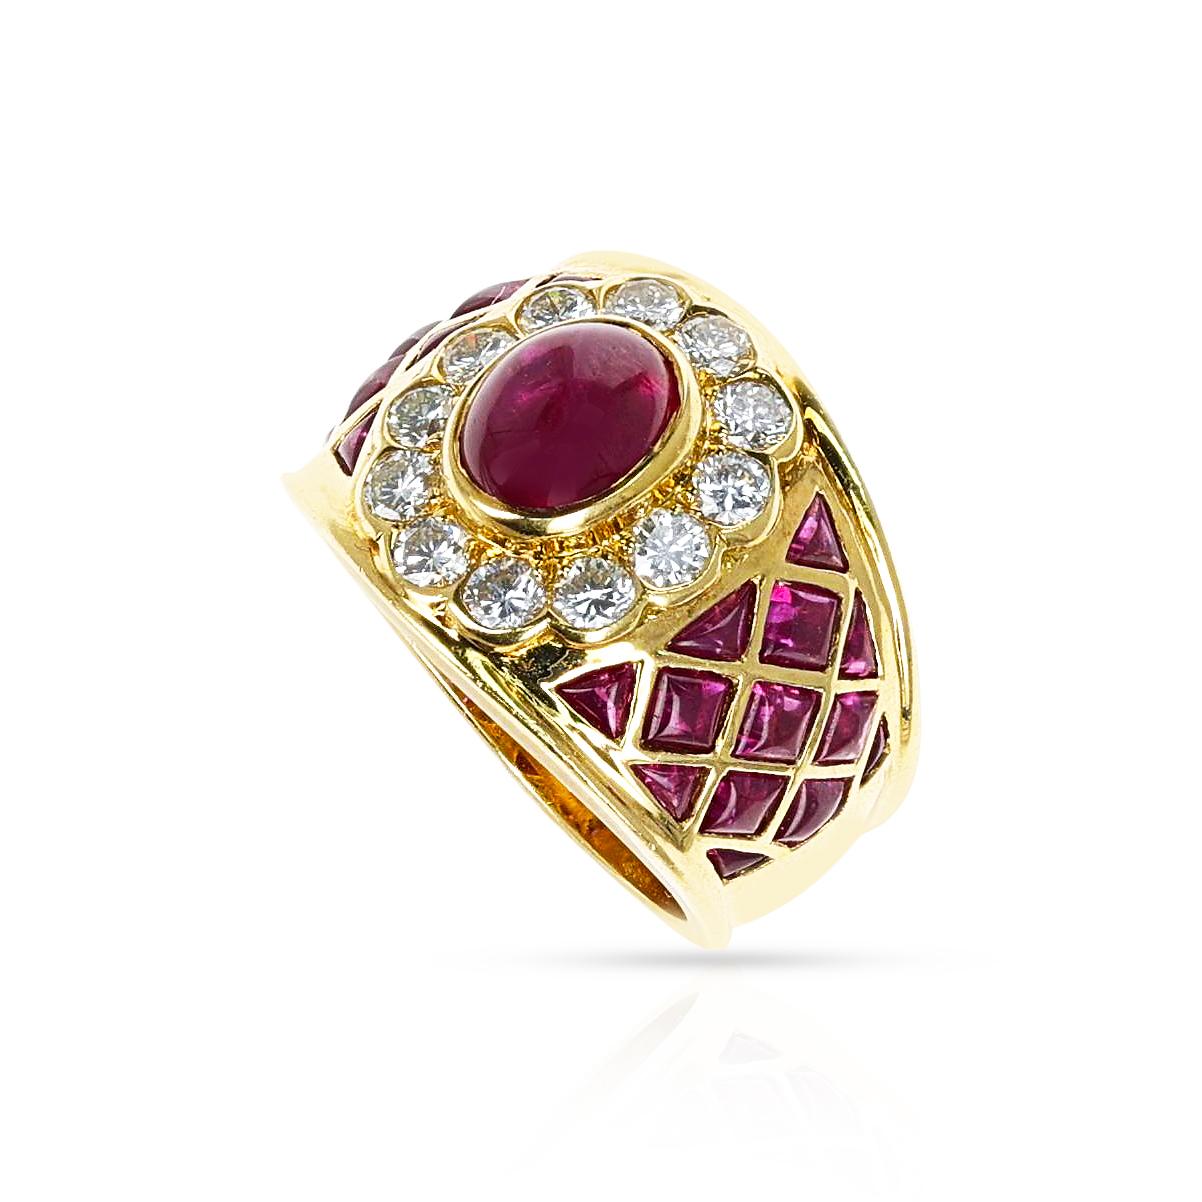 Ruby Cabochon Cocktail Ring with Rubies and Diamonds, 18k In Excellent Condition For Sale In New York, NY